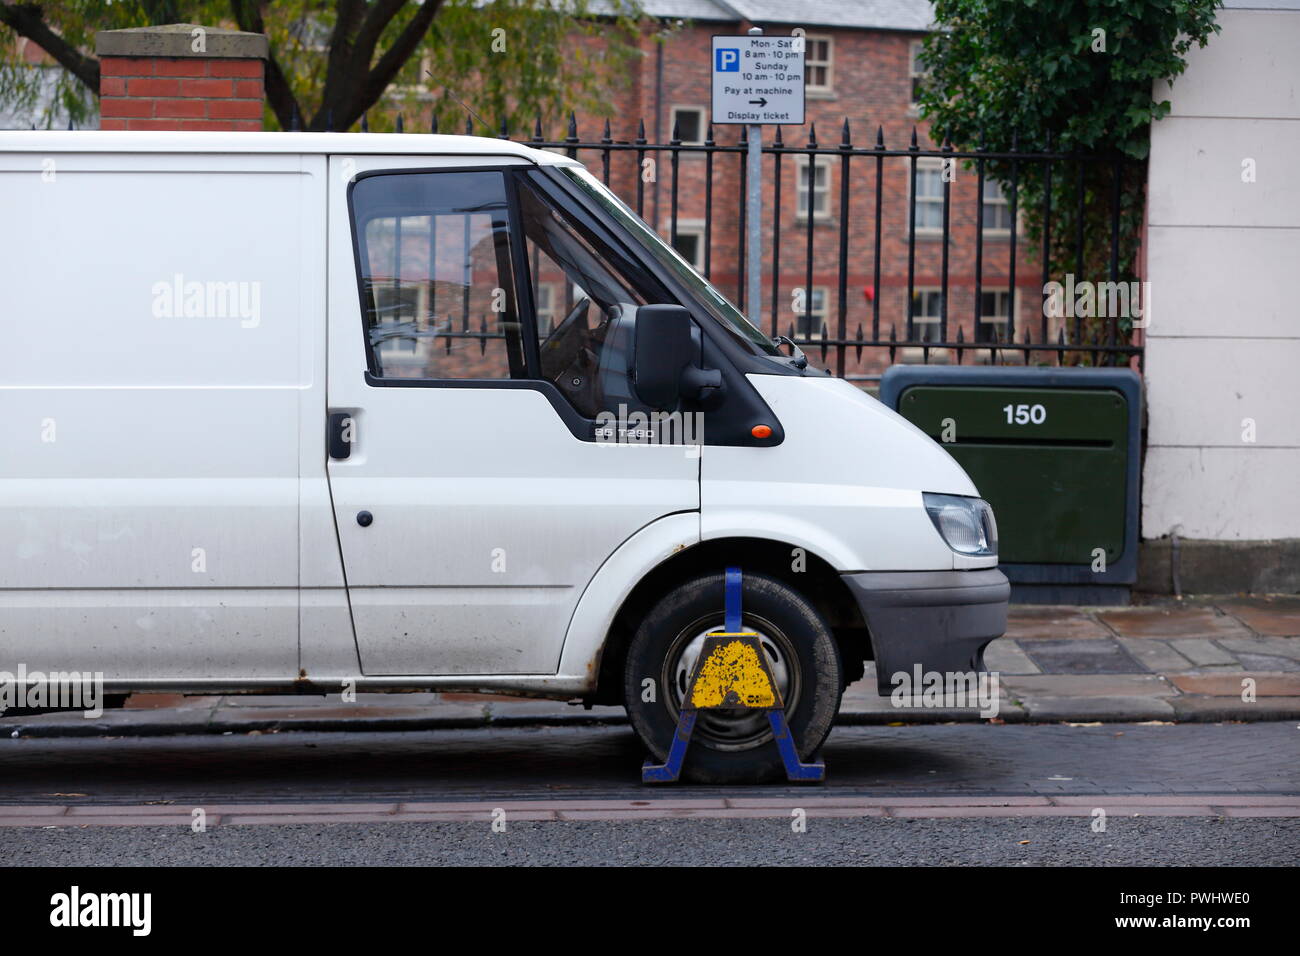 A vehicle with a wheel clamp attached due to a parking offence Stock Photo